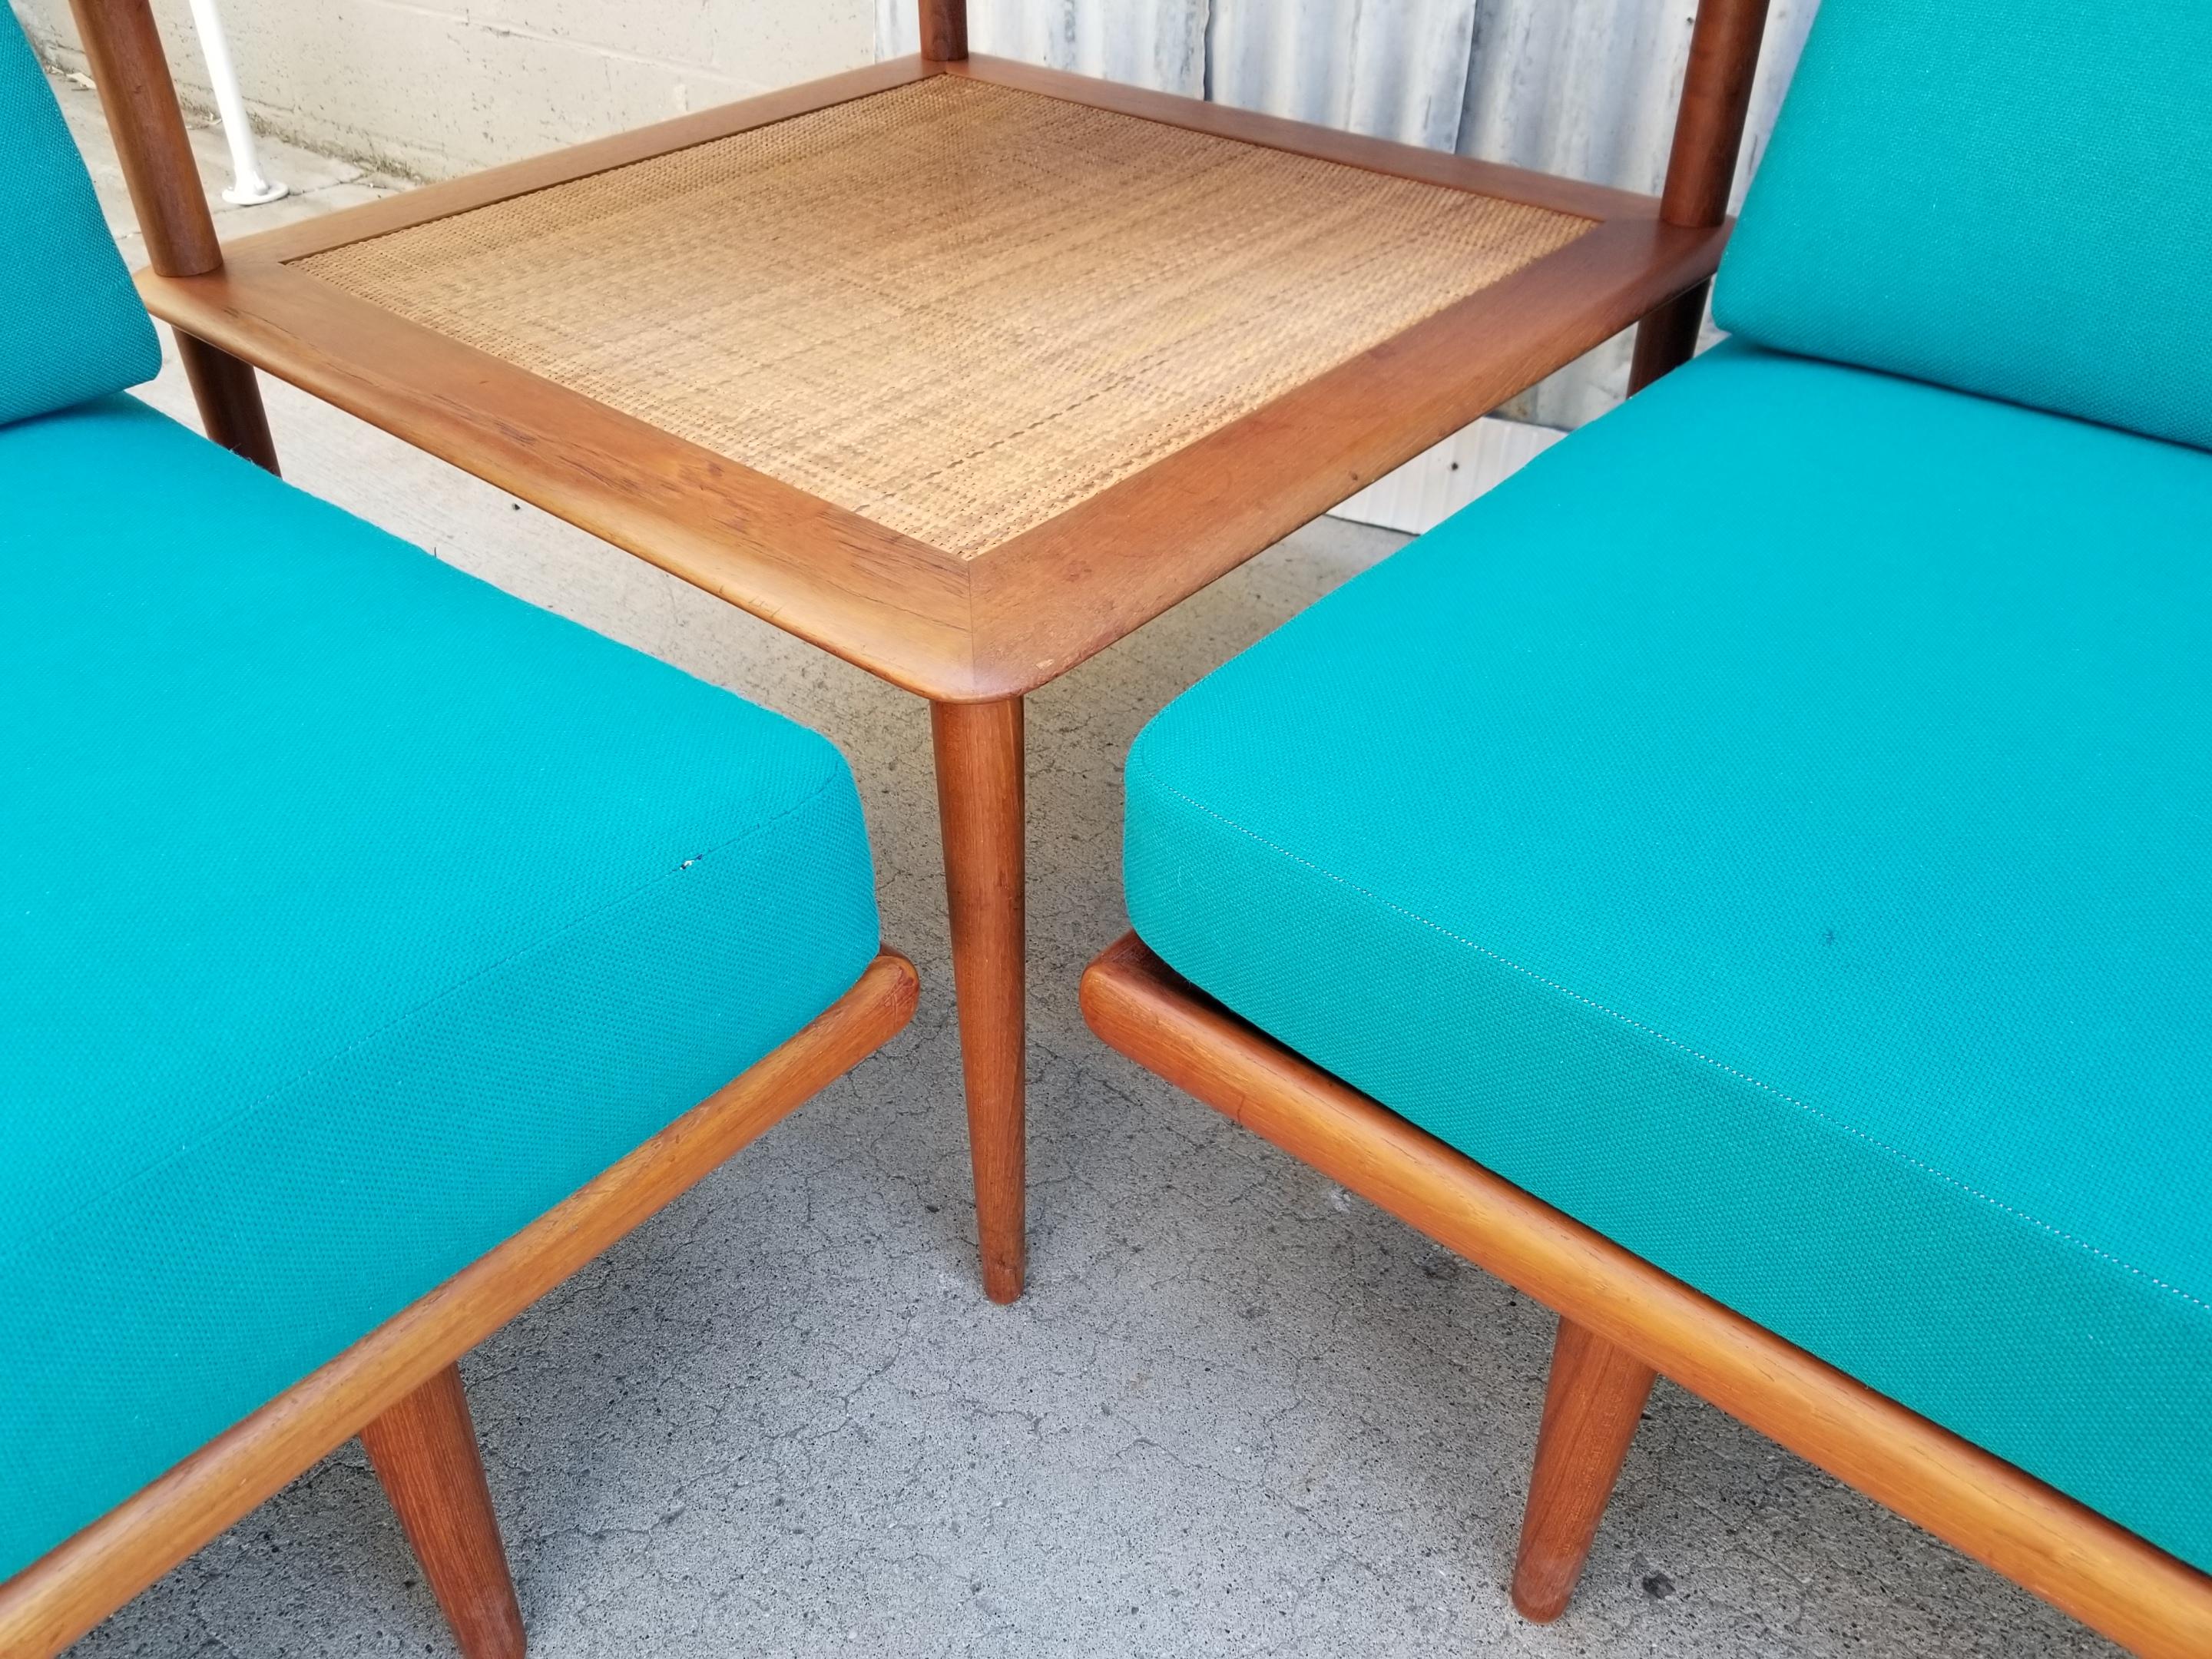 A fine Peter Hvidt / Orla Molgaard Nielsen teak Danish modern 3 piece sofa set. Consisting of 2 sofas and a corner table. All pieces retain France & Son and John Stuart labels. Excellent craftsmanship crafted entirely of solid teak. Deep, rich glow